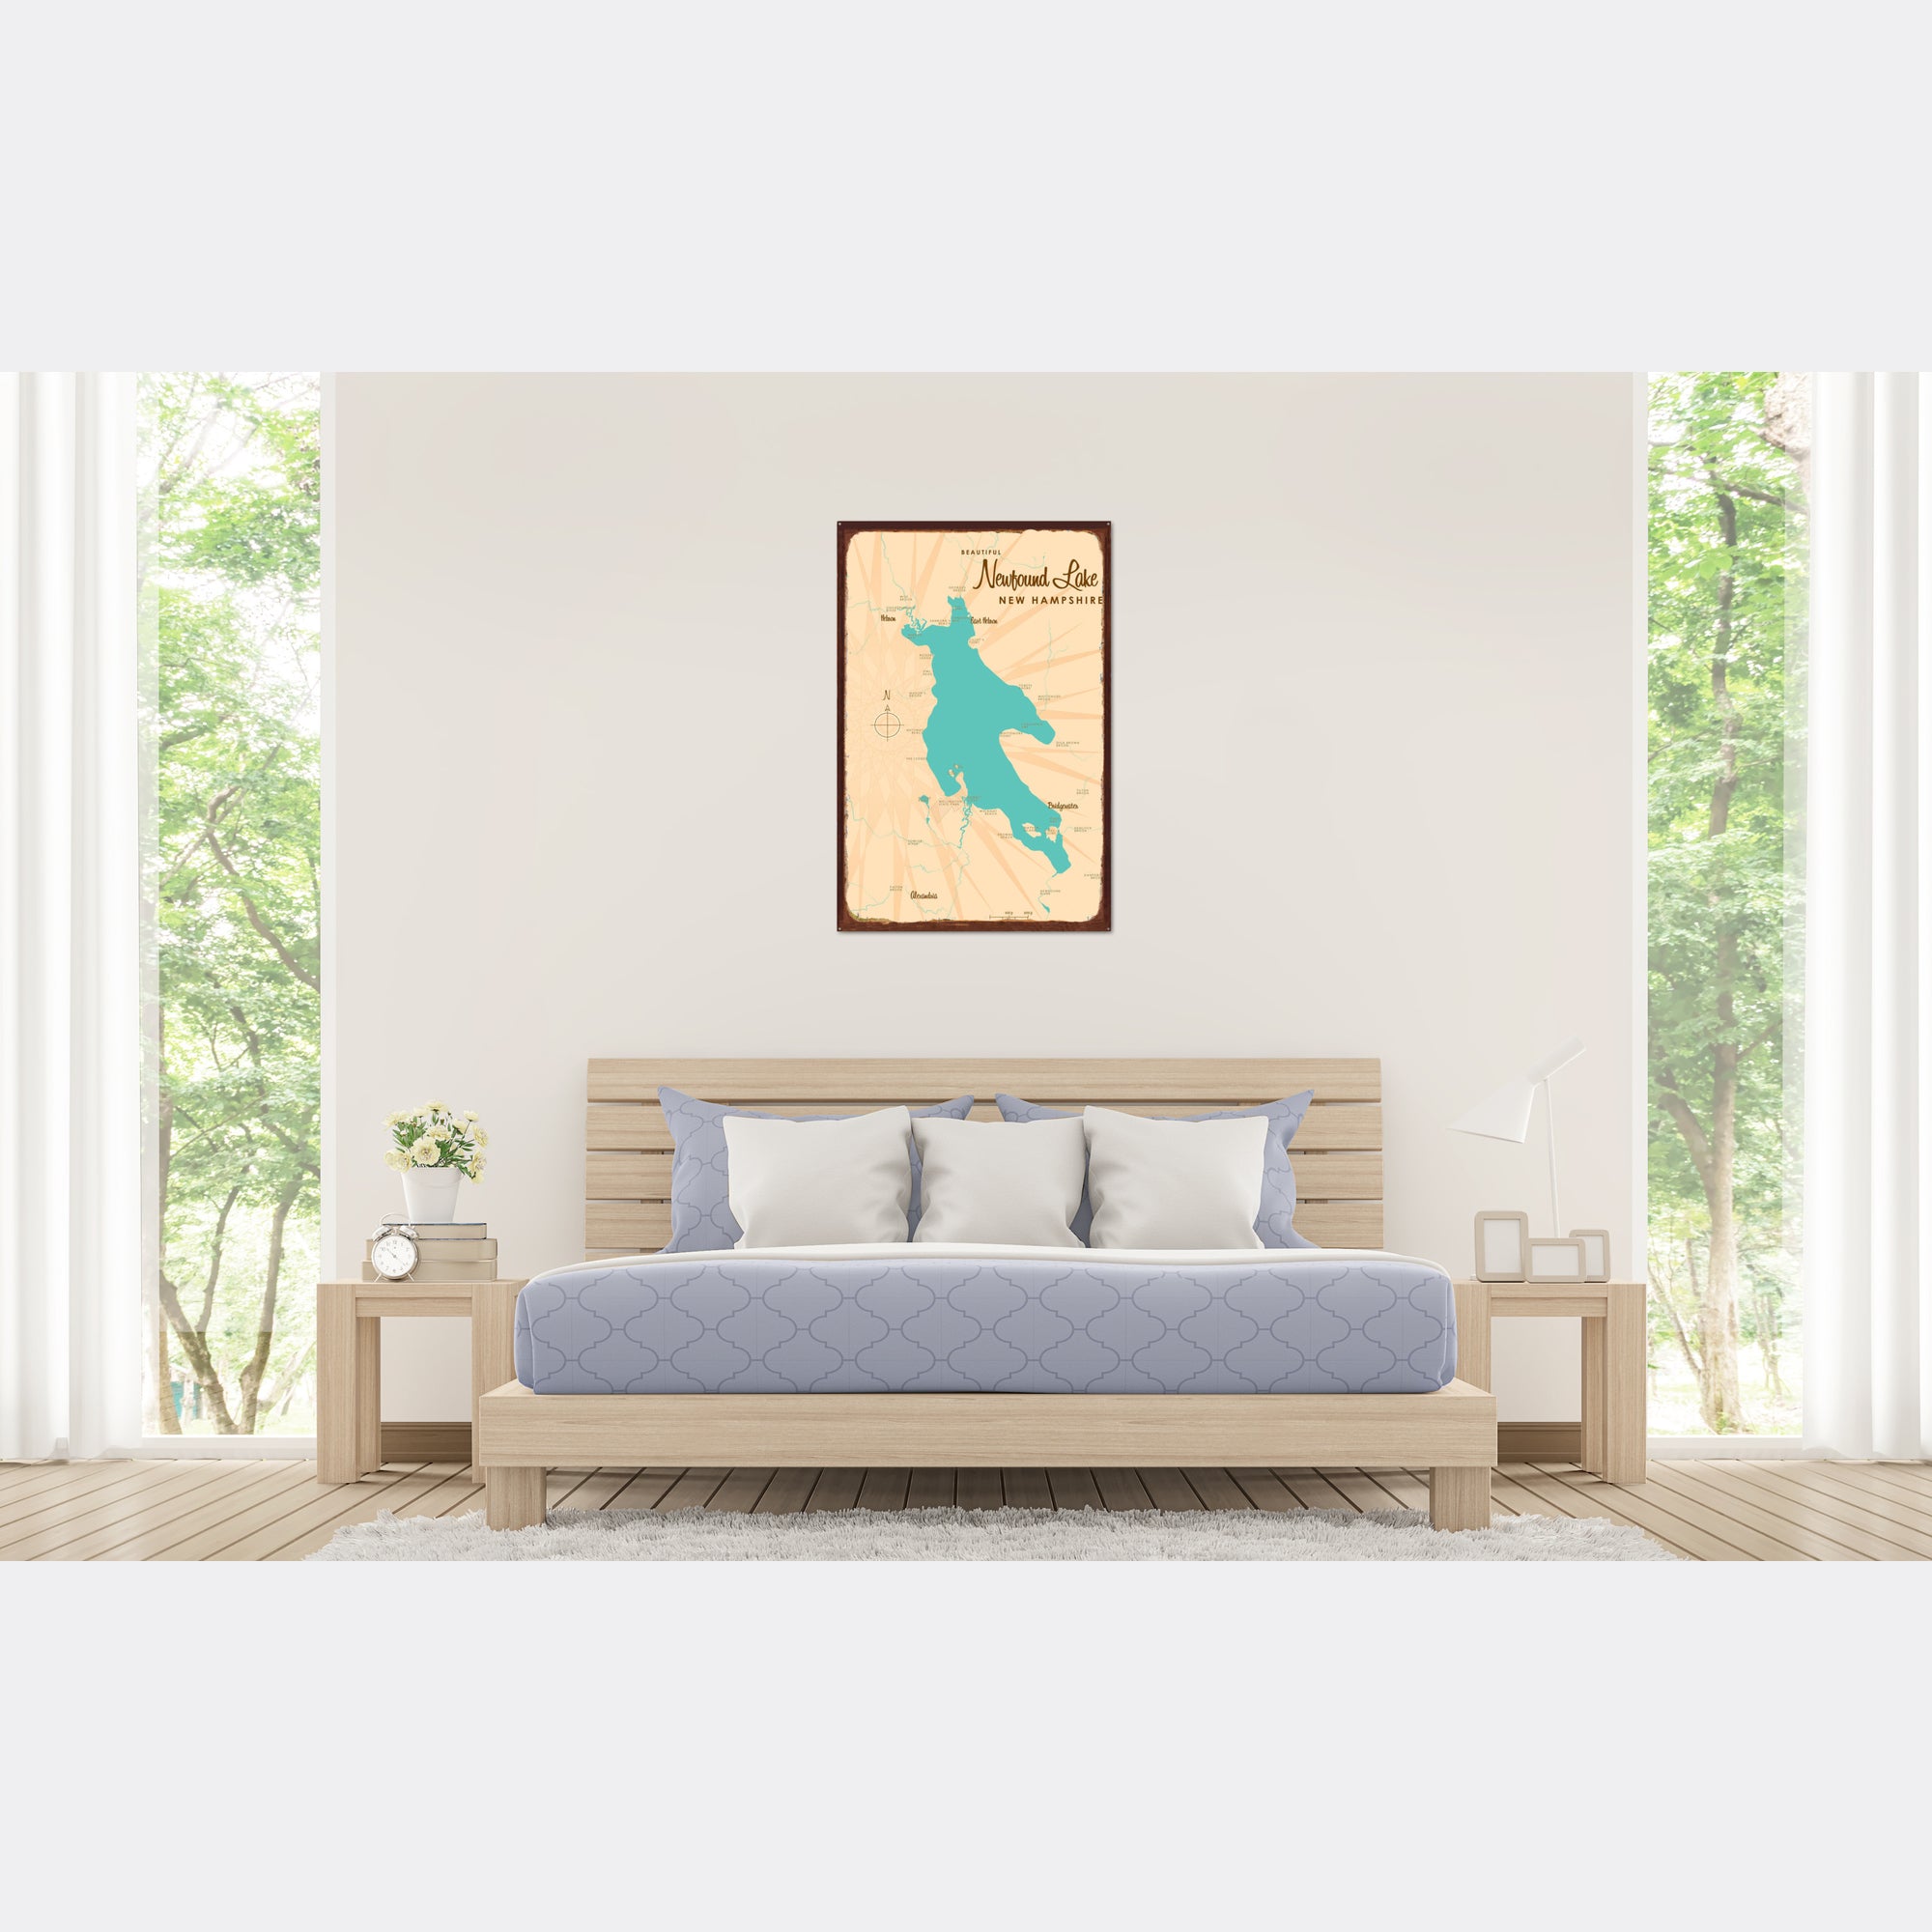 Newfound Lake New Hampshire, Rustic Metal Sign Map Art